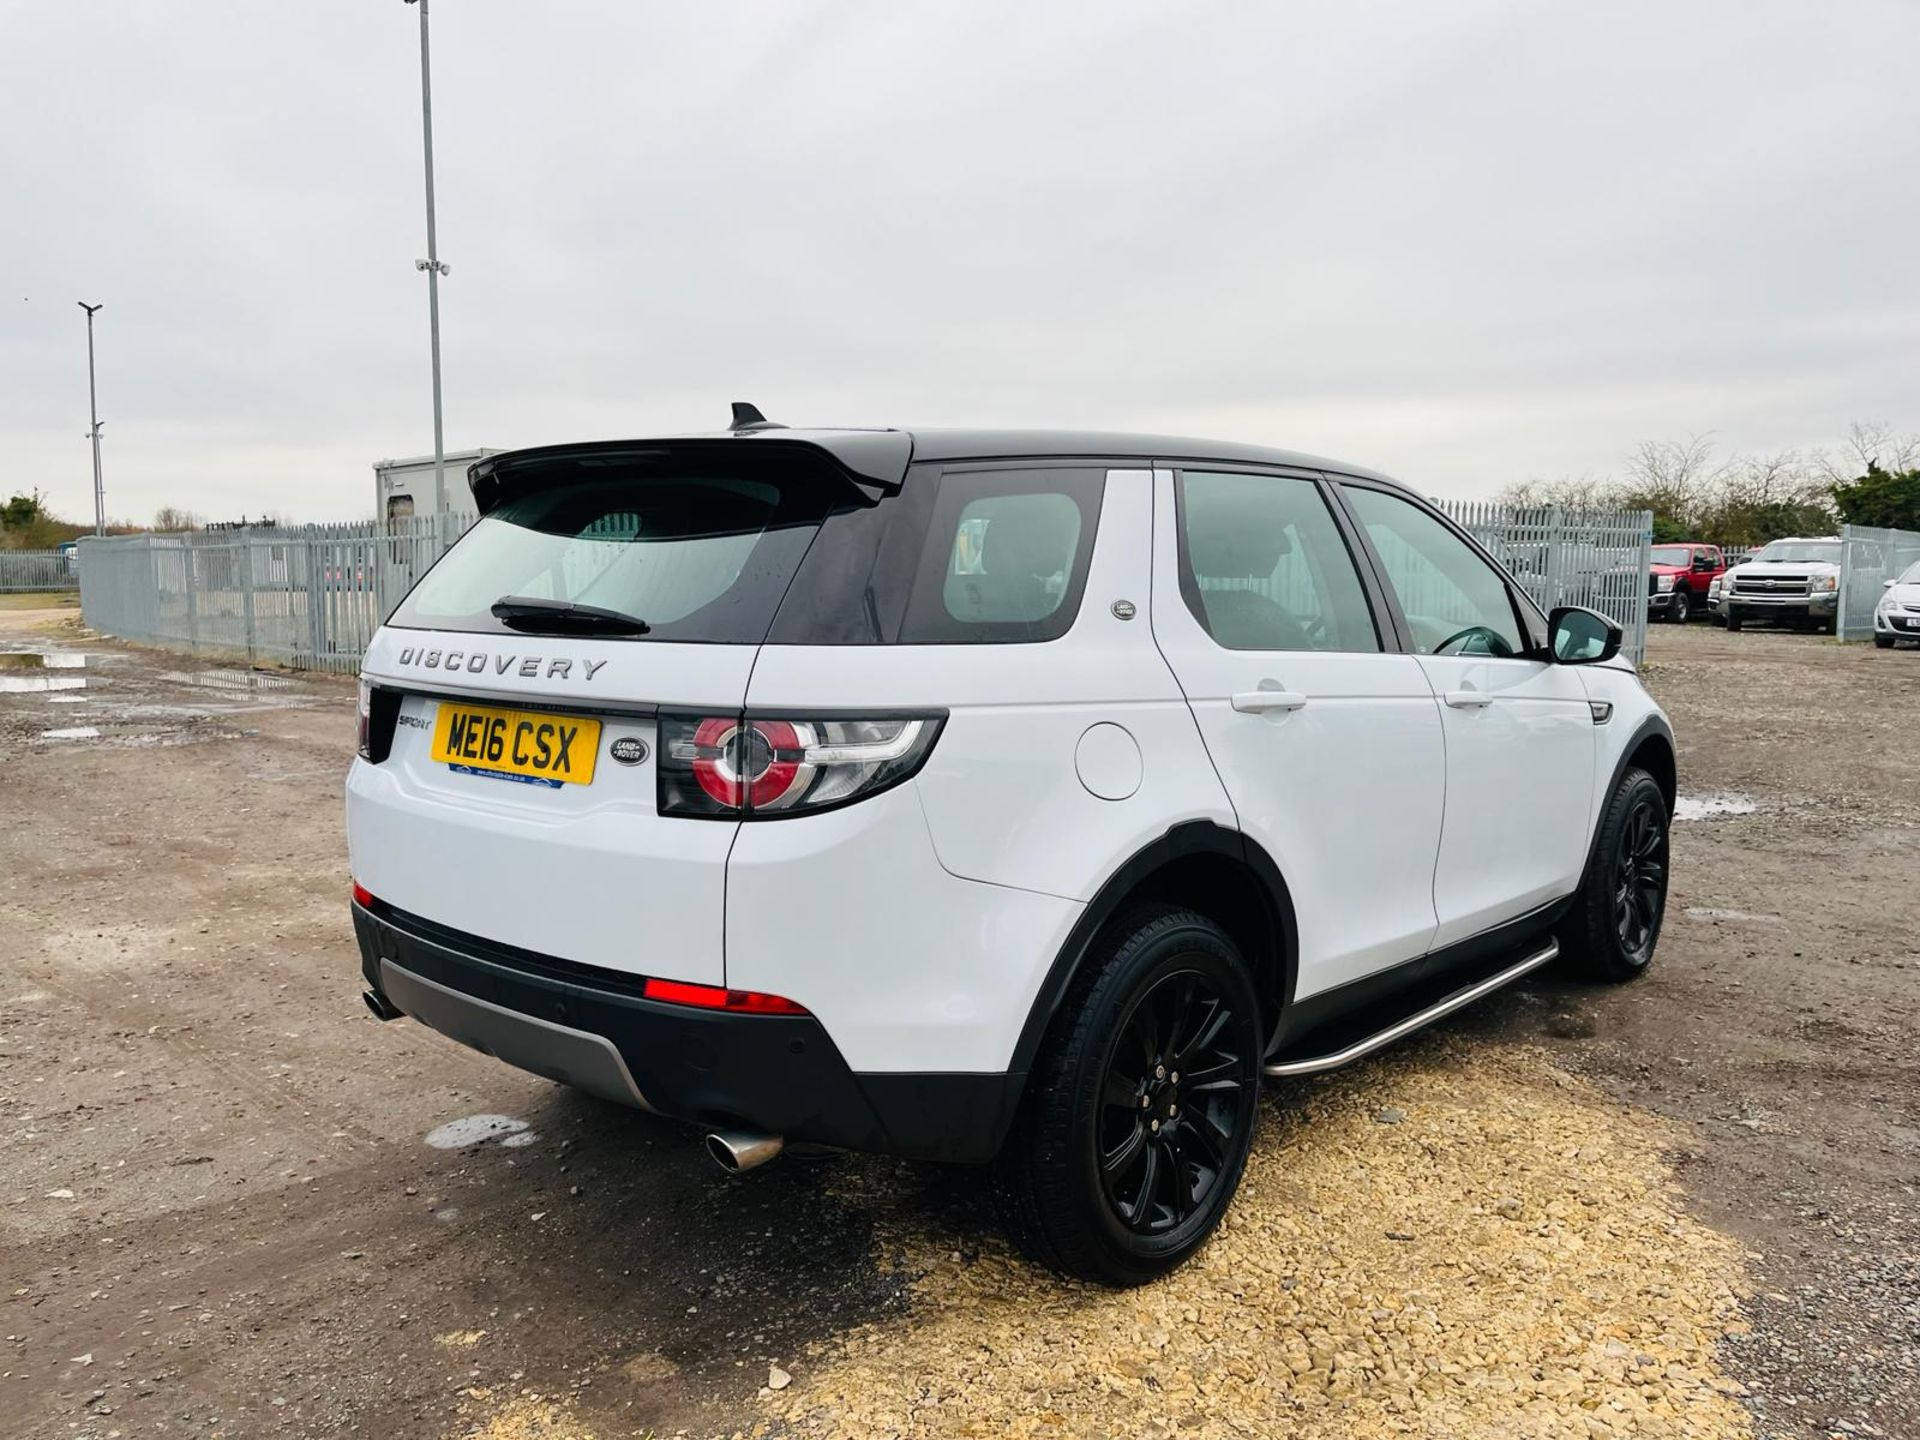 ** ON SALE ** Land Rover Discovery Sport 2.0 SE TD4 180 Automatic -2016'16 Reg' -ULEZ Compliant - Image 11 of 35